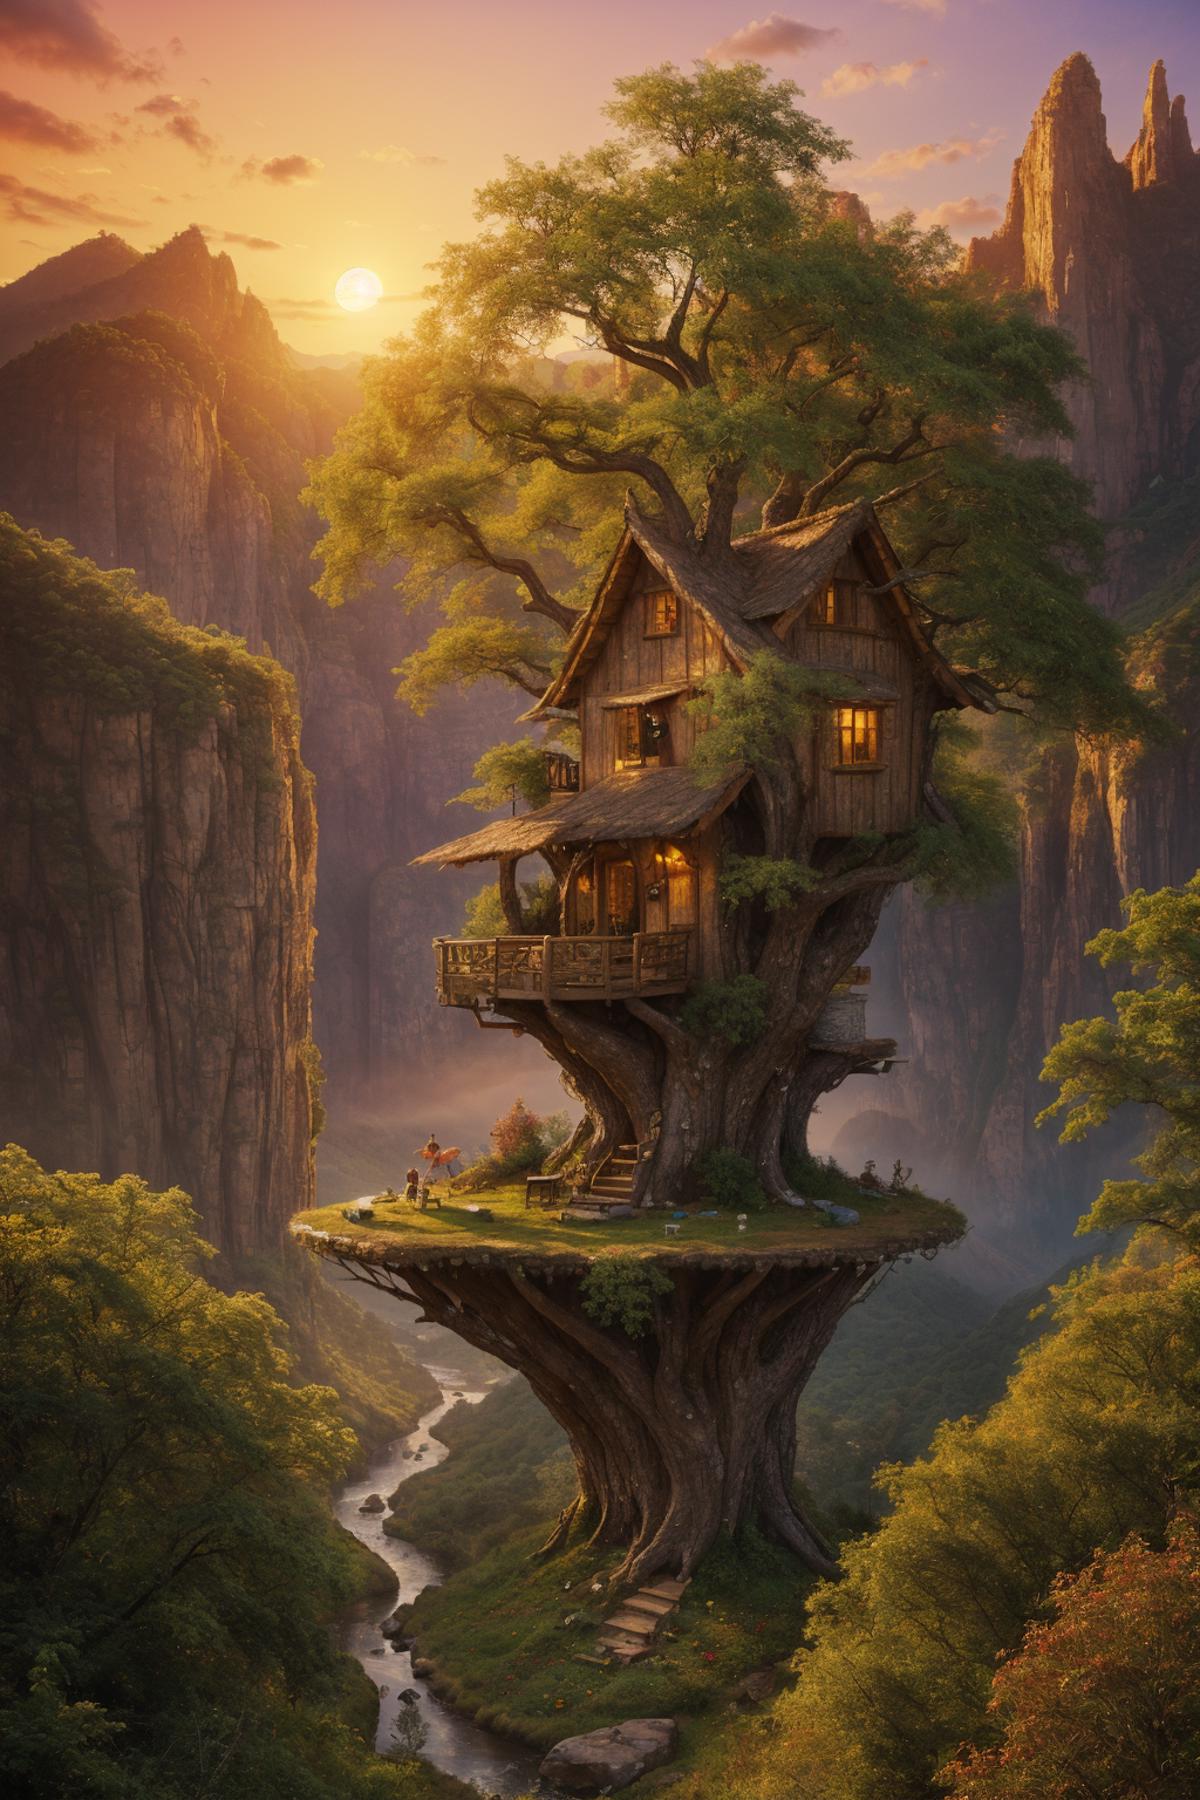 A Treehouse with a House on Top of a Tree in a Mountainous Area